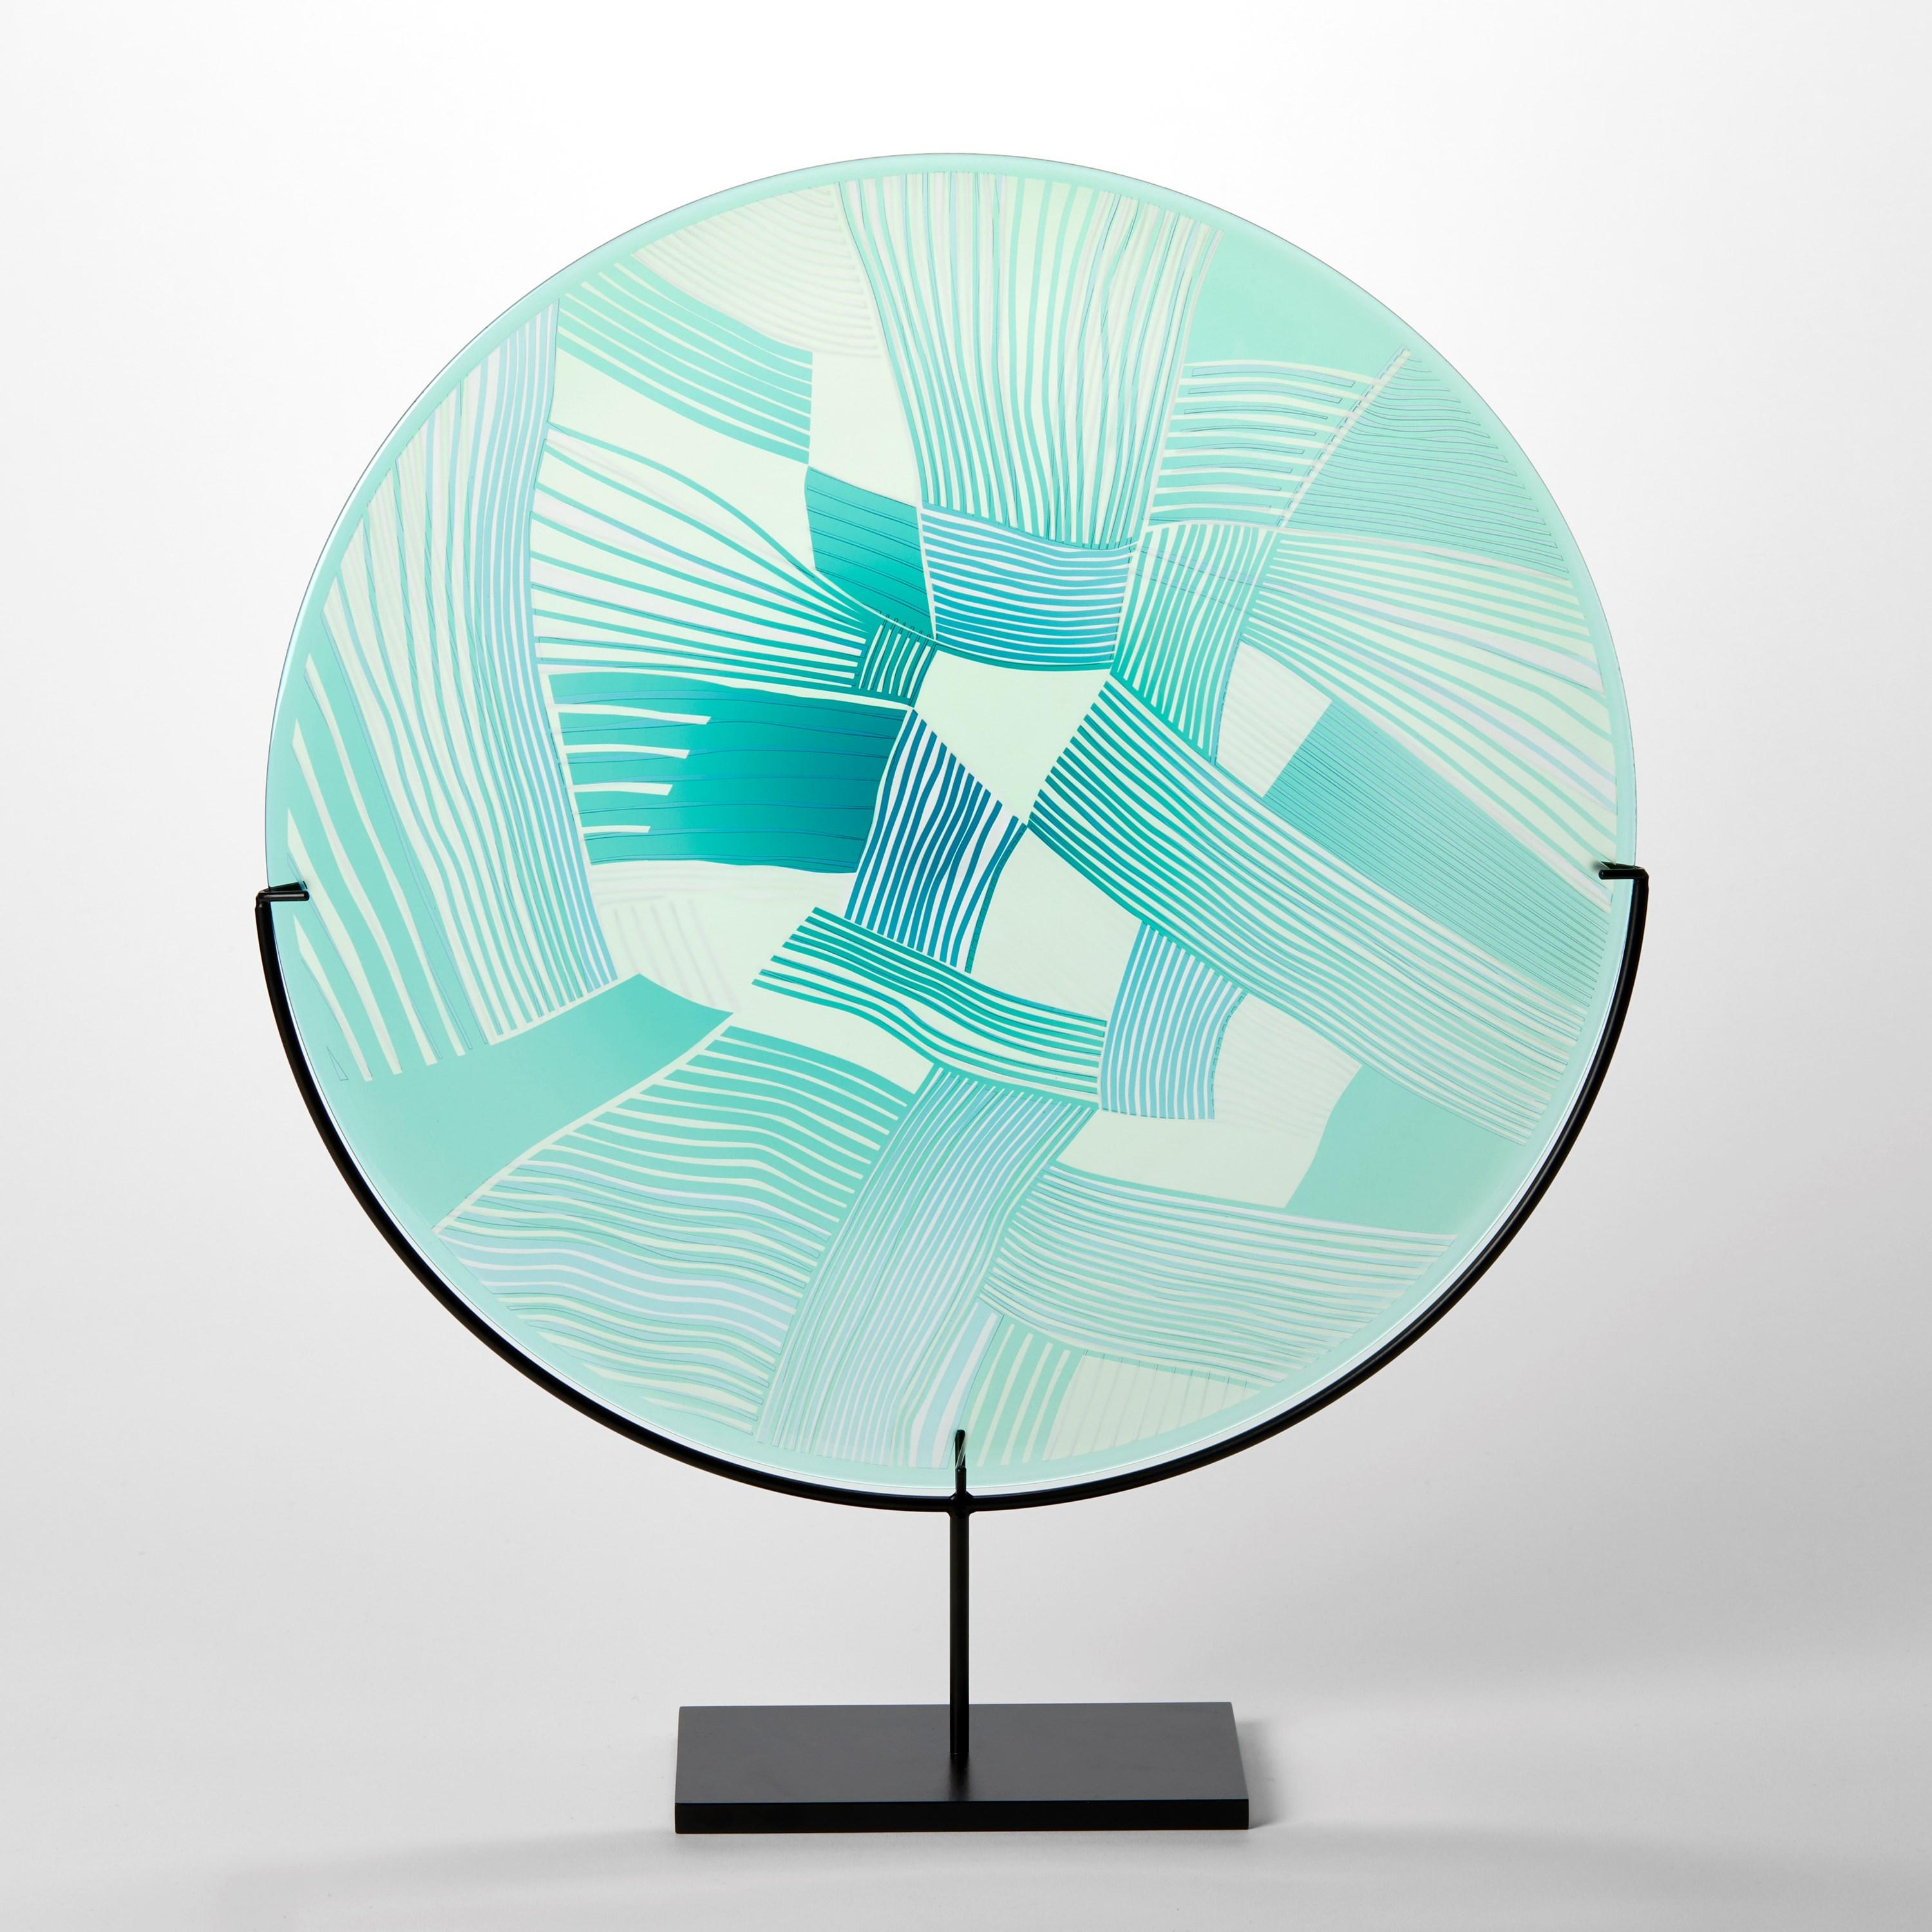 'Abstracted Land Aqua Blue over Grass Green' is a unique handblown and cut glass artwork by the British artist, Kate Jones of Gillies Jones.

In the artist's own words:

“This new body of work references both the evident structure of the landscape